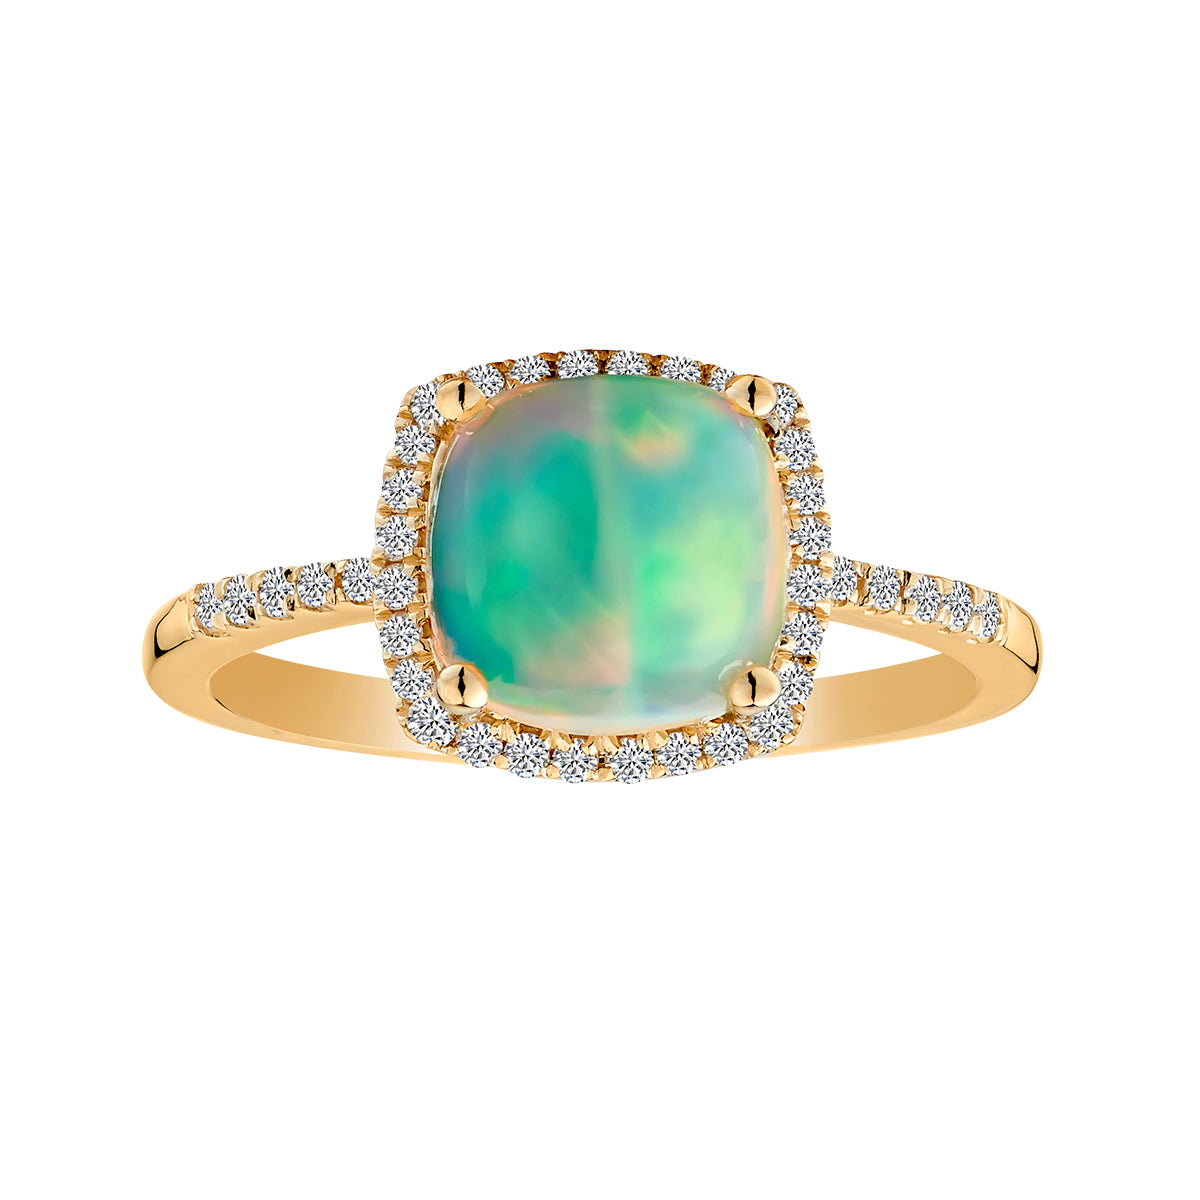 1.62 Carat Ethiopian Opal and .19 Carat Diamond Ring,  10kt Yellow Gold. Gemstone Rings. Griffin Jewellery Designs